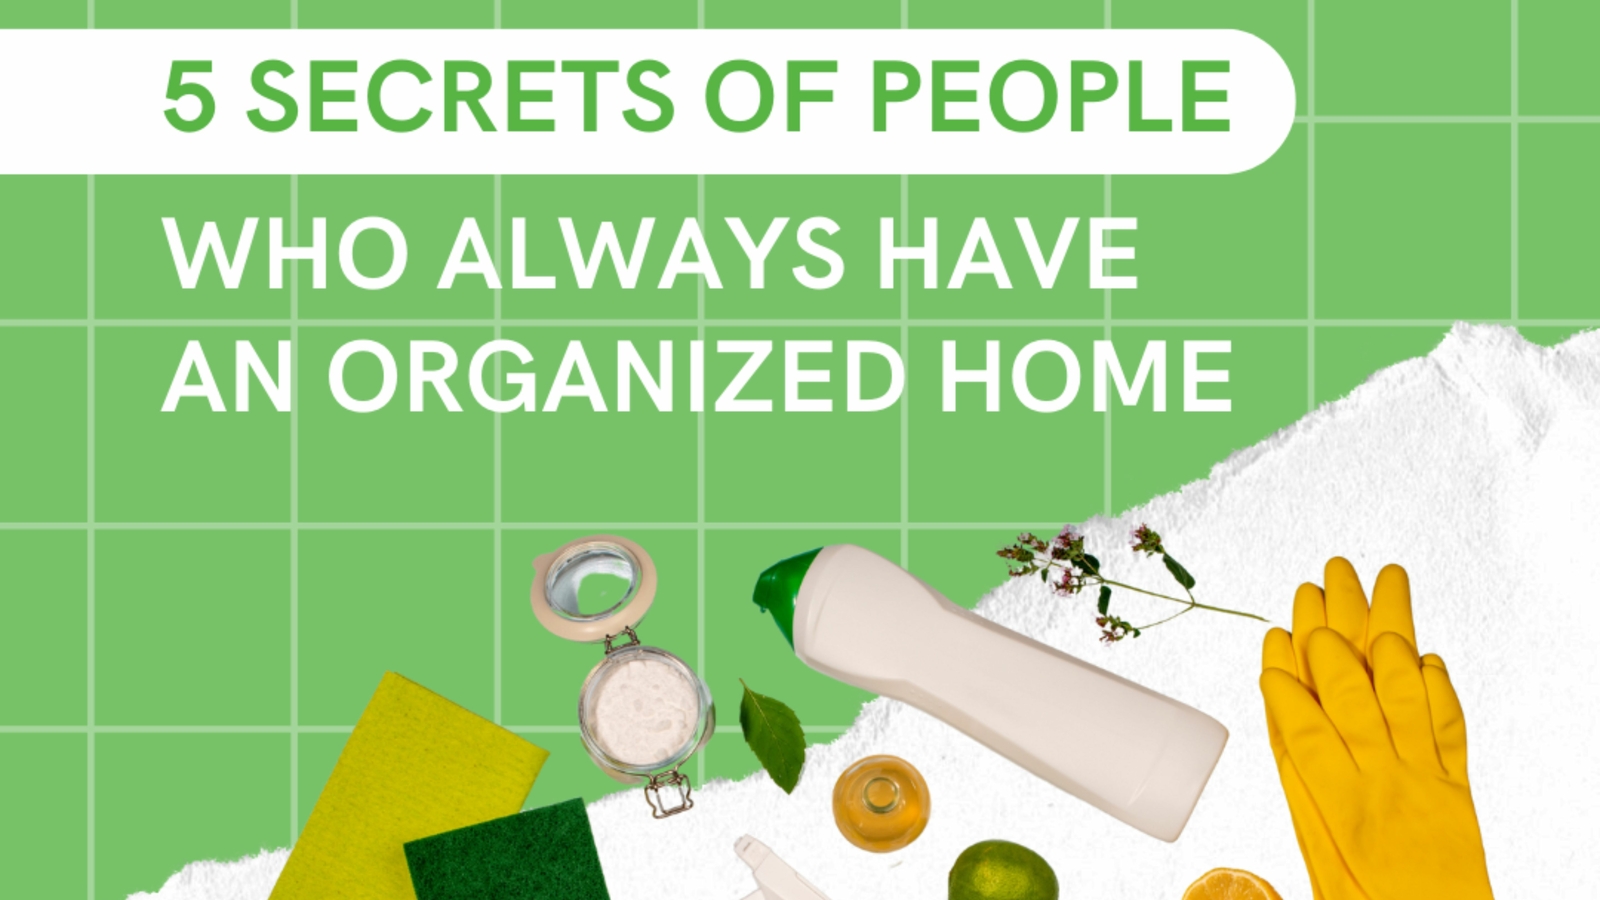 5 Secrets of People Who Always Have an Organized Home